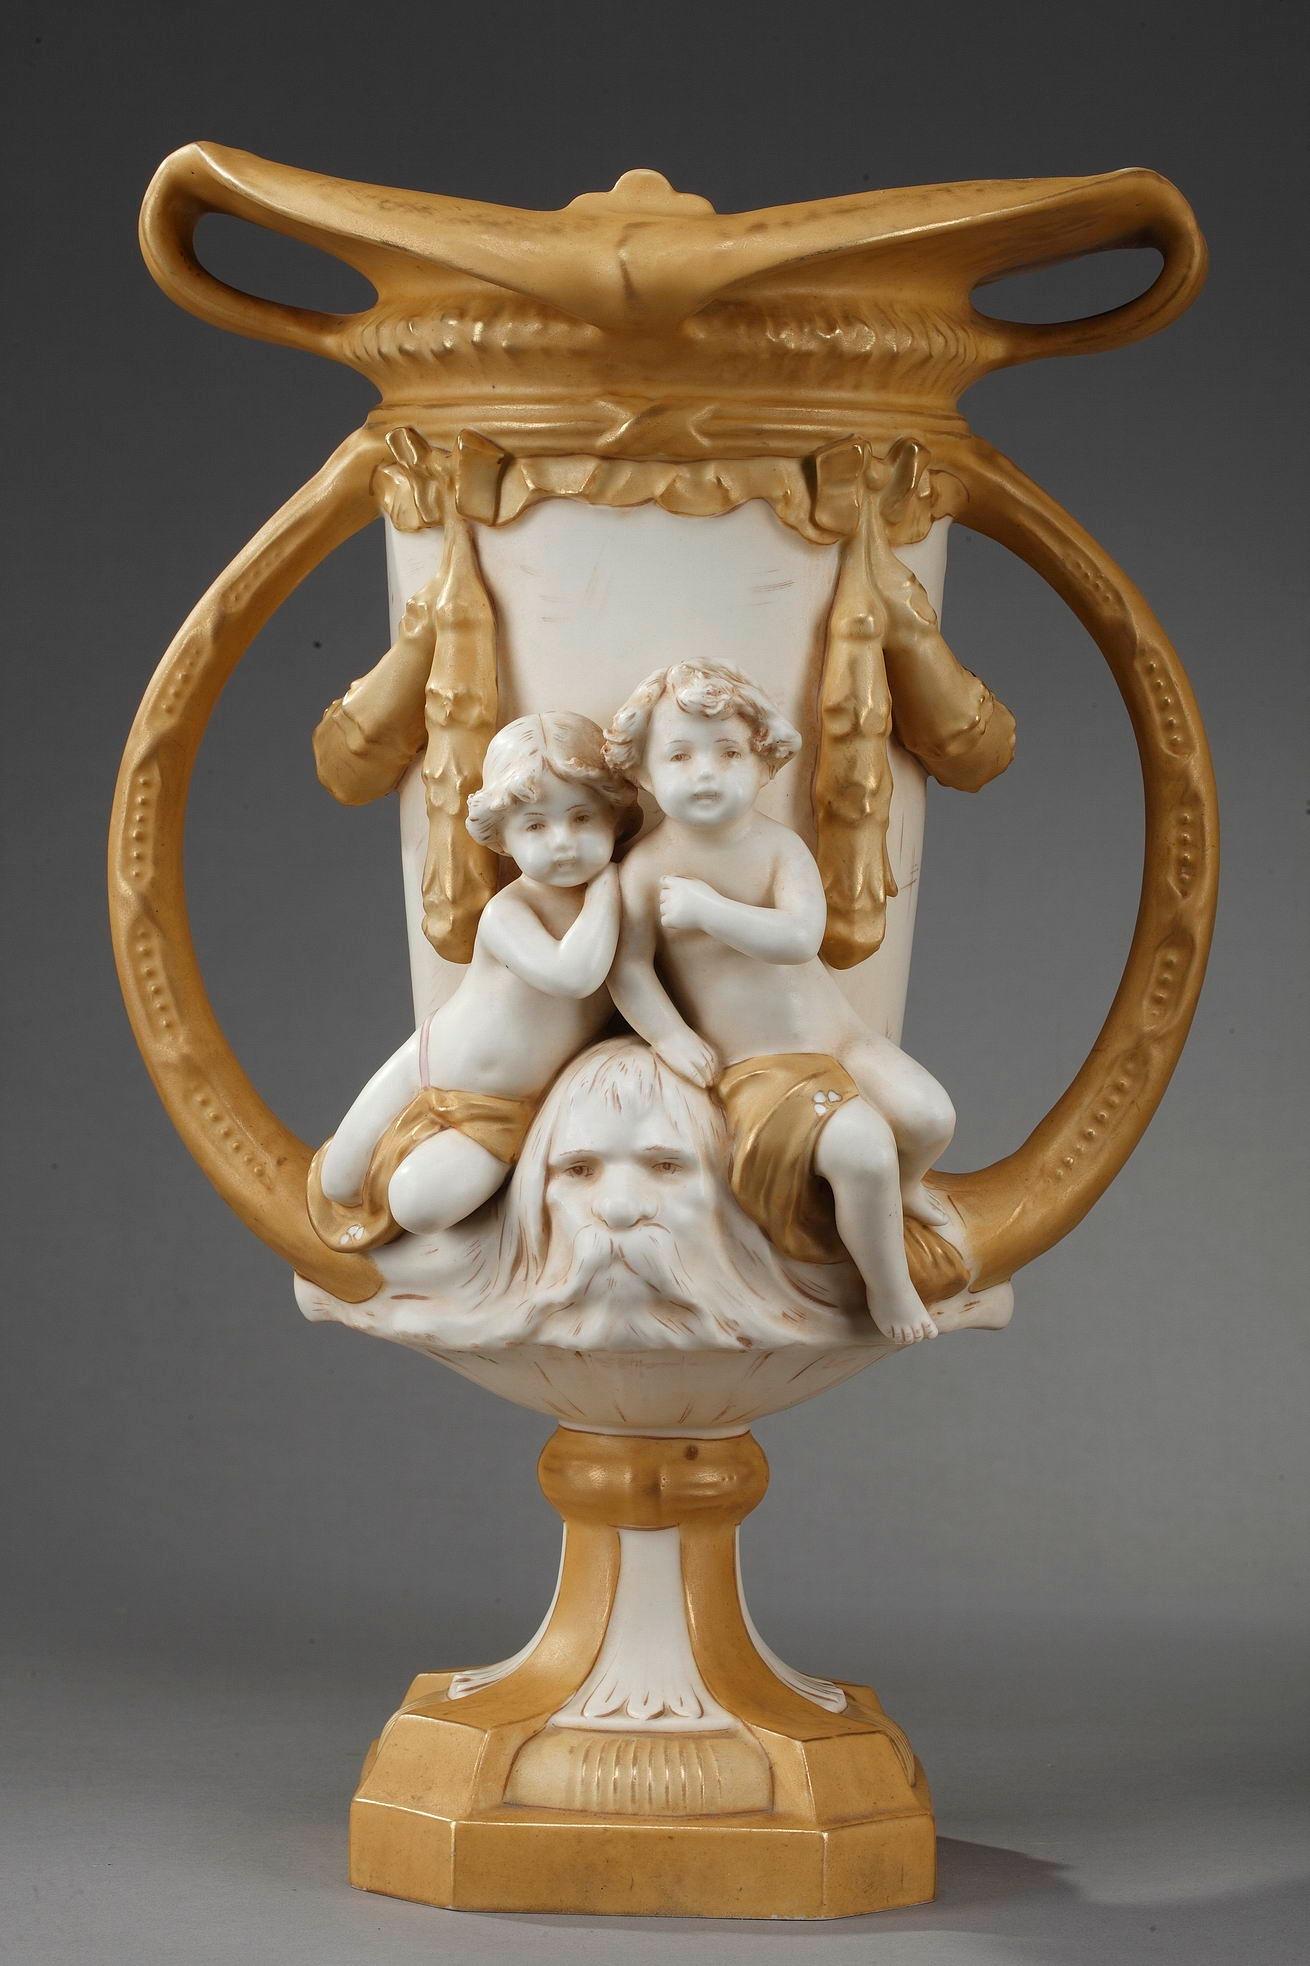 Royal Dux Bohemia vases beautifully crafted in white and gold-colored?porcelain, featuring children and bearded masks. Displaying a rich decor of ribbon and aquatic plant motifs, these vases exemplifie the style and decoration of the 1900 era.